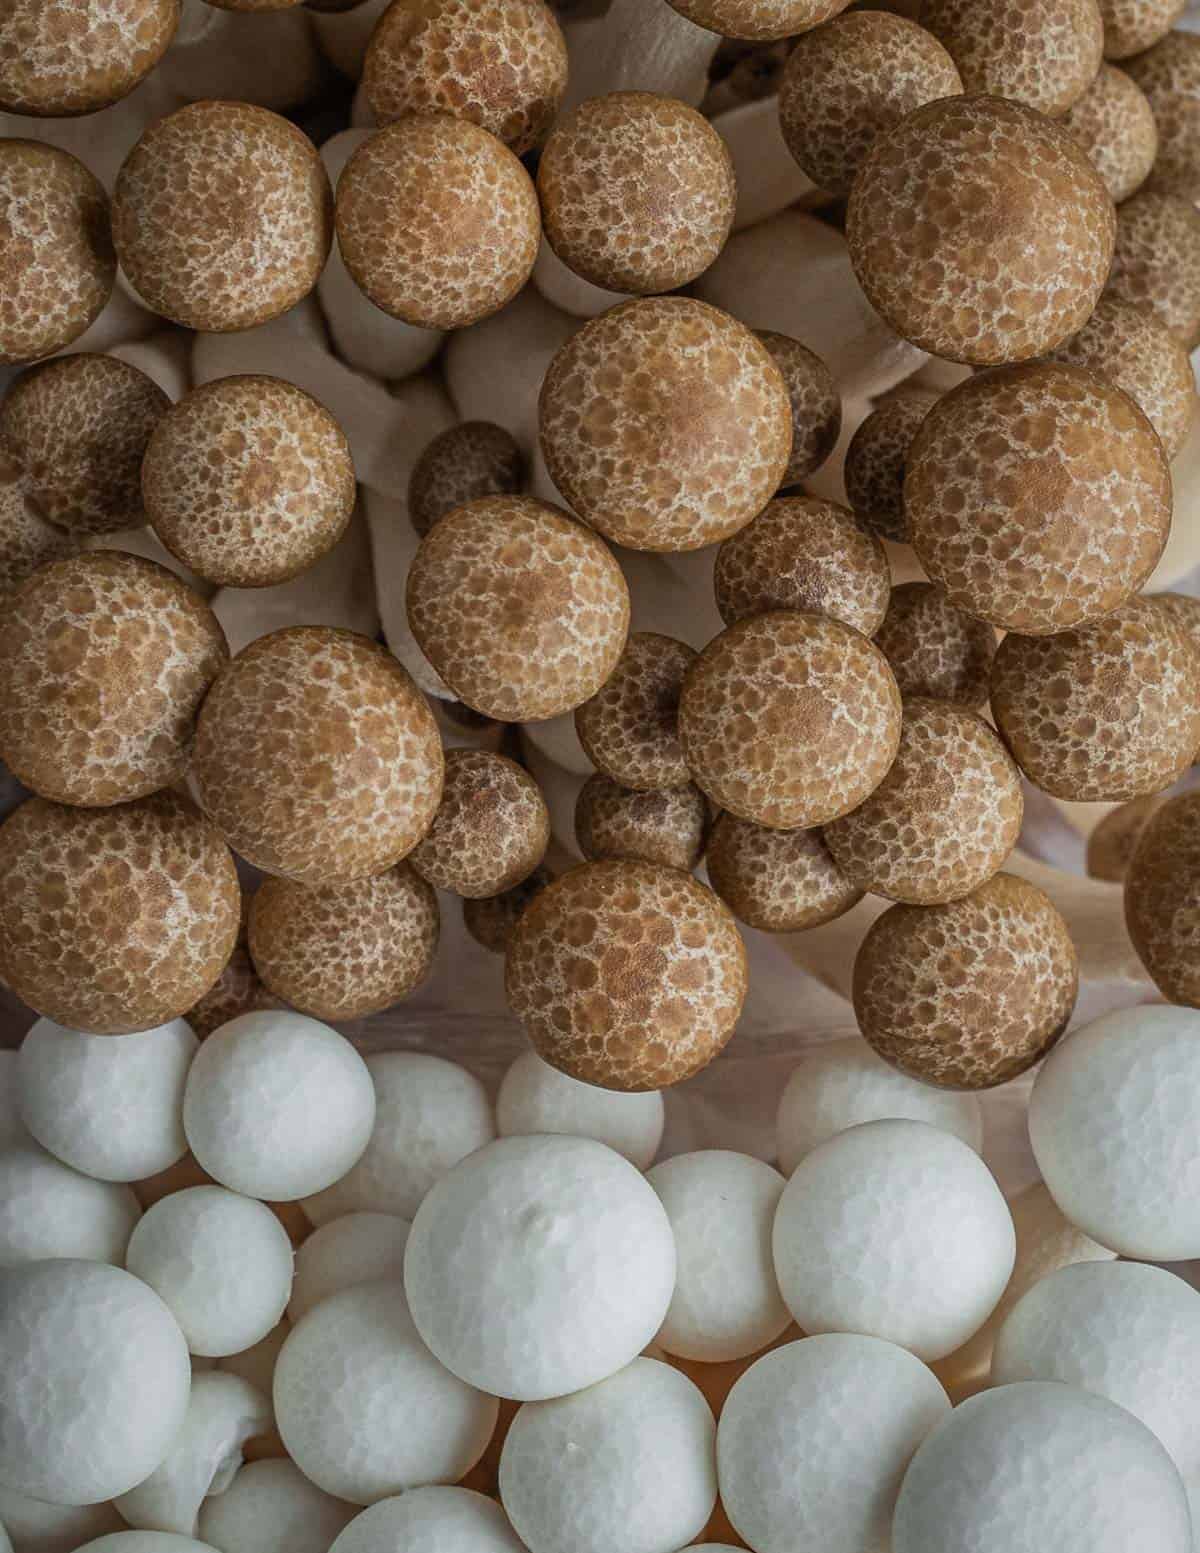 A top down image comparing the caps of brown beech mushrooms with white beech mushrooms. 